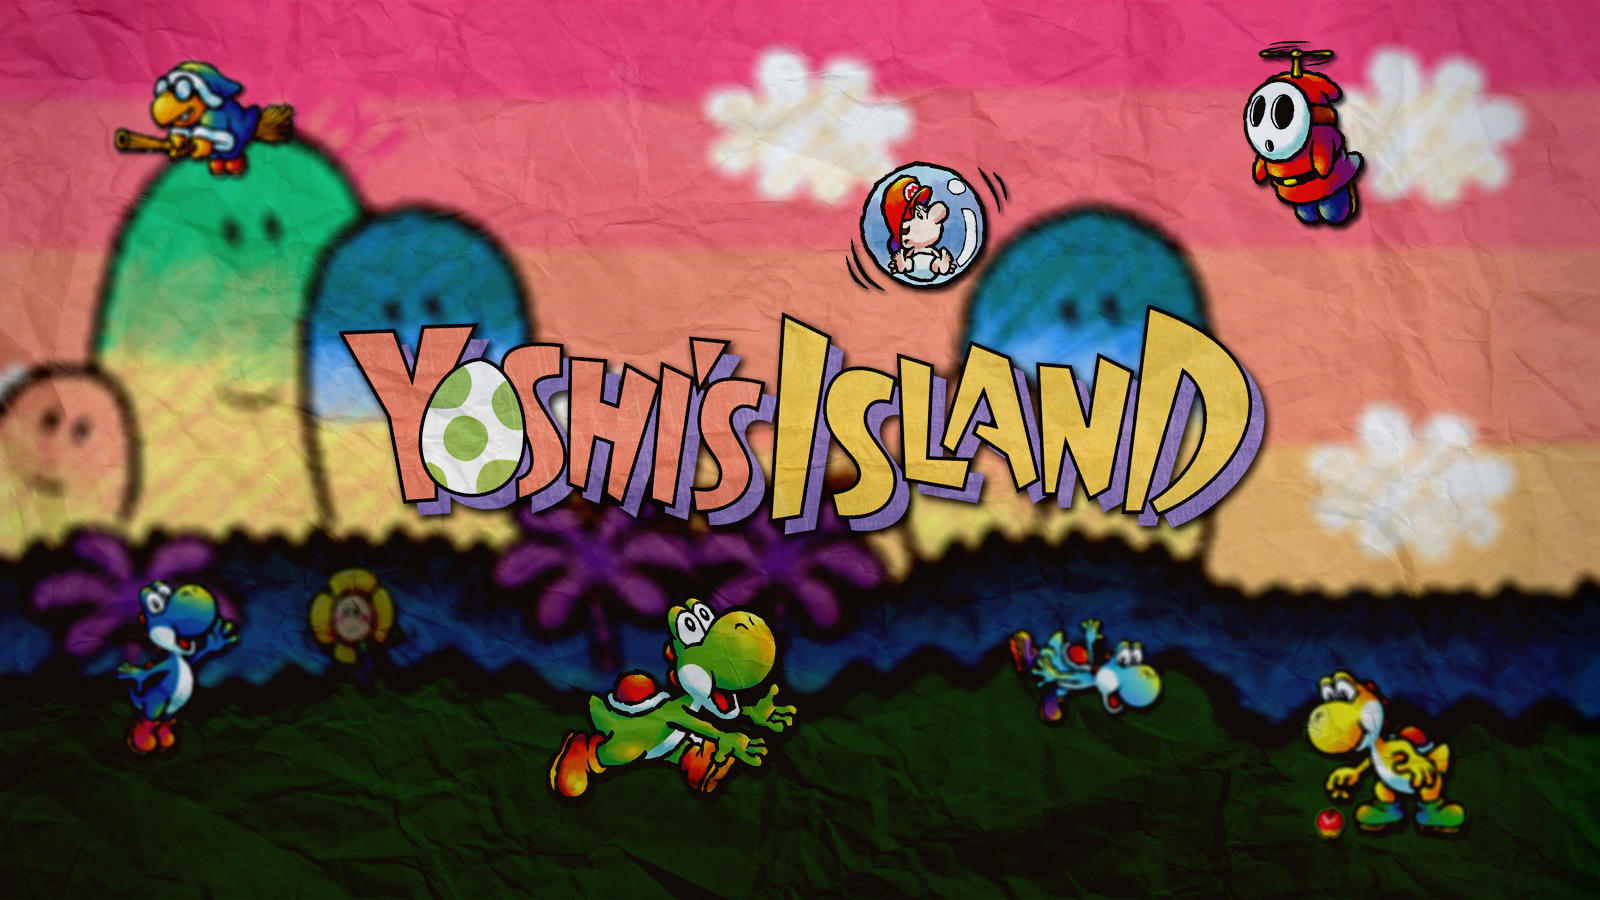 Super Mario World 2: Yoshi's Island wallpapers for desktop, download free  Super Mario World 2: Yoshi's Island pictures and backgrounds for PC |  